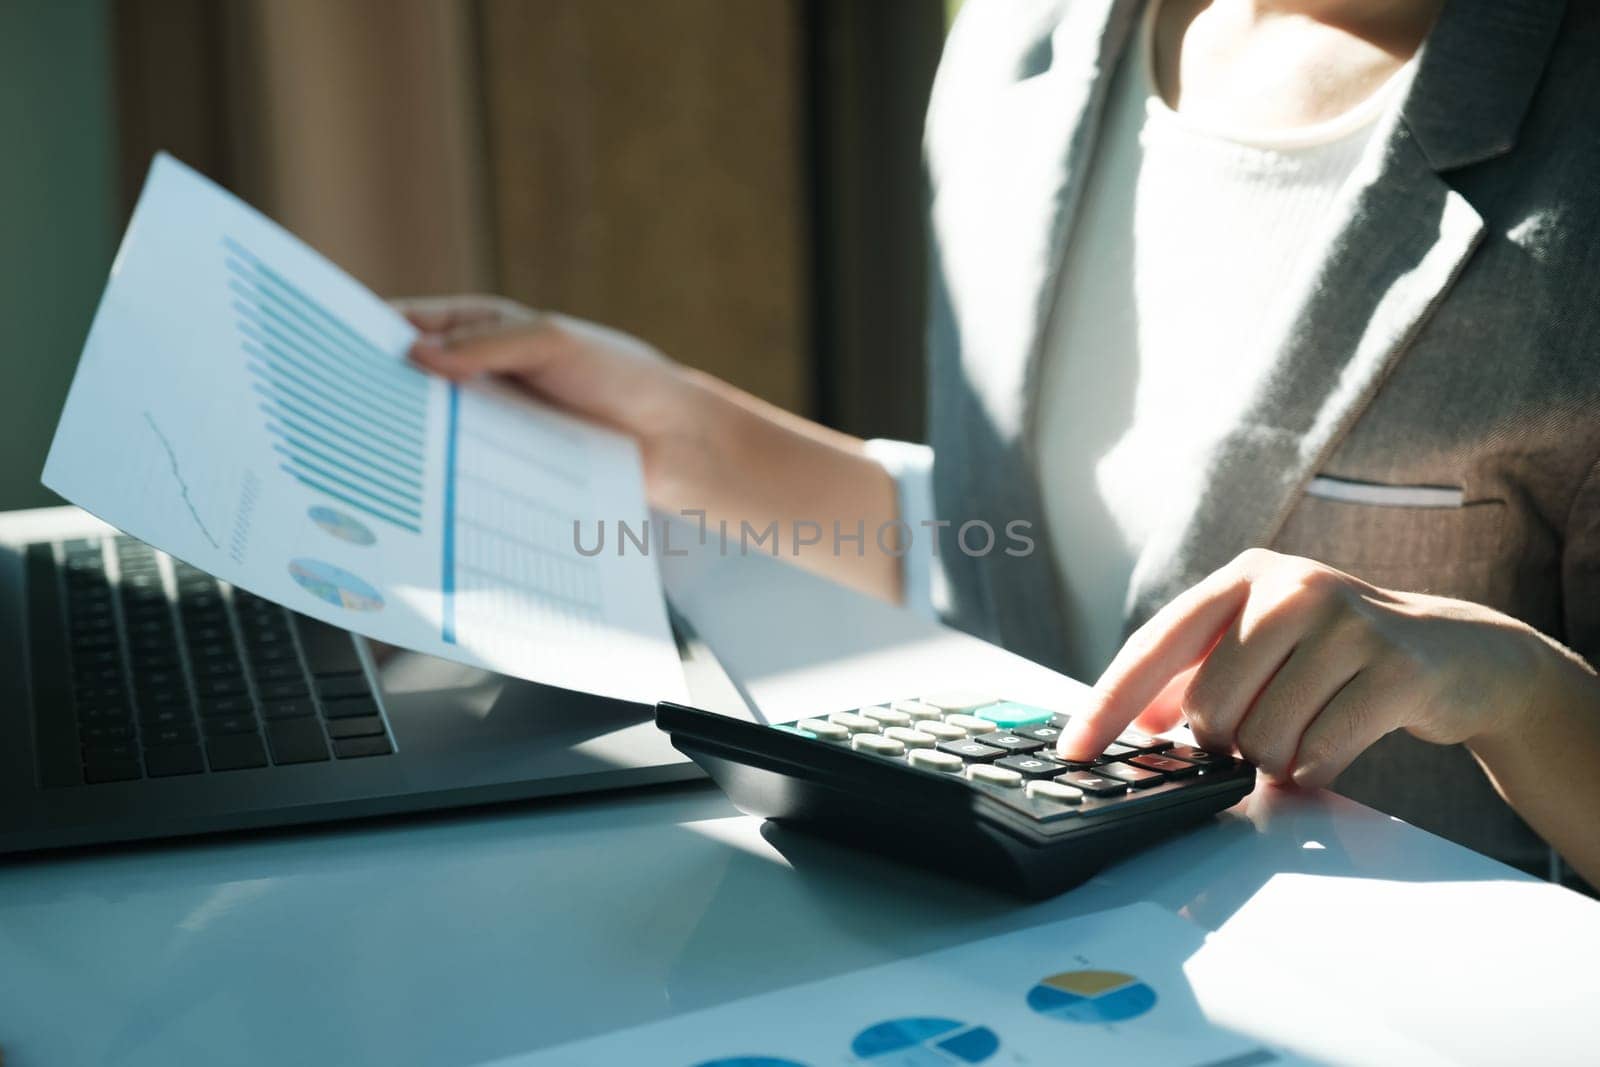 A woman is sitting at a desk with a calculator and a piece of paper with graphs on it. She is focused on the paper and the calculator, possibly working on a project or analyzing data